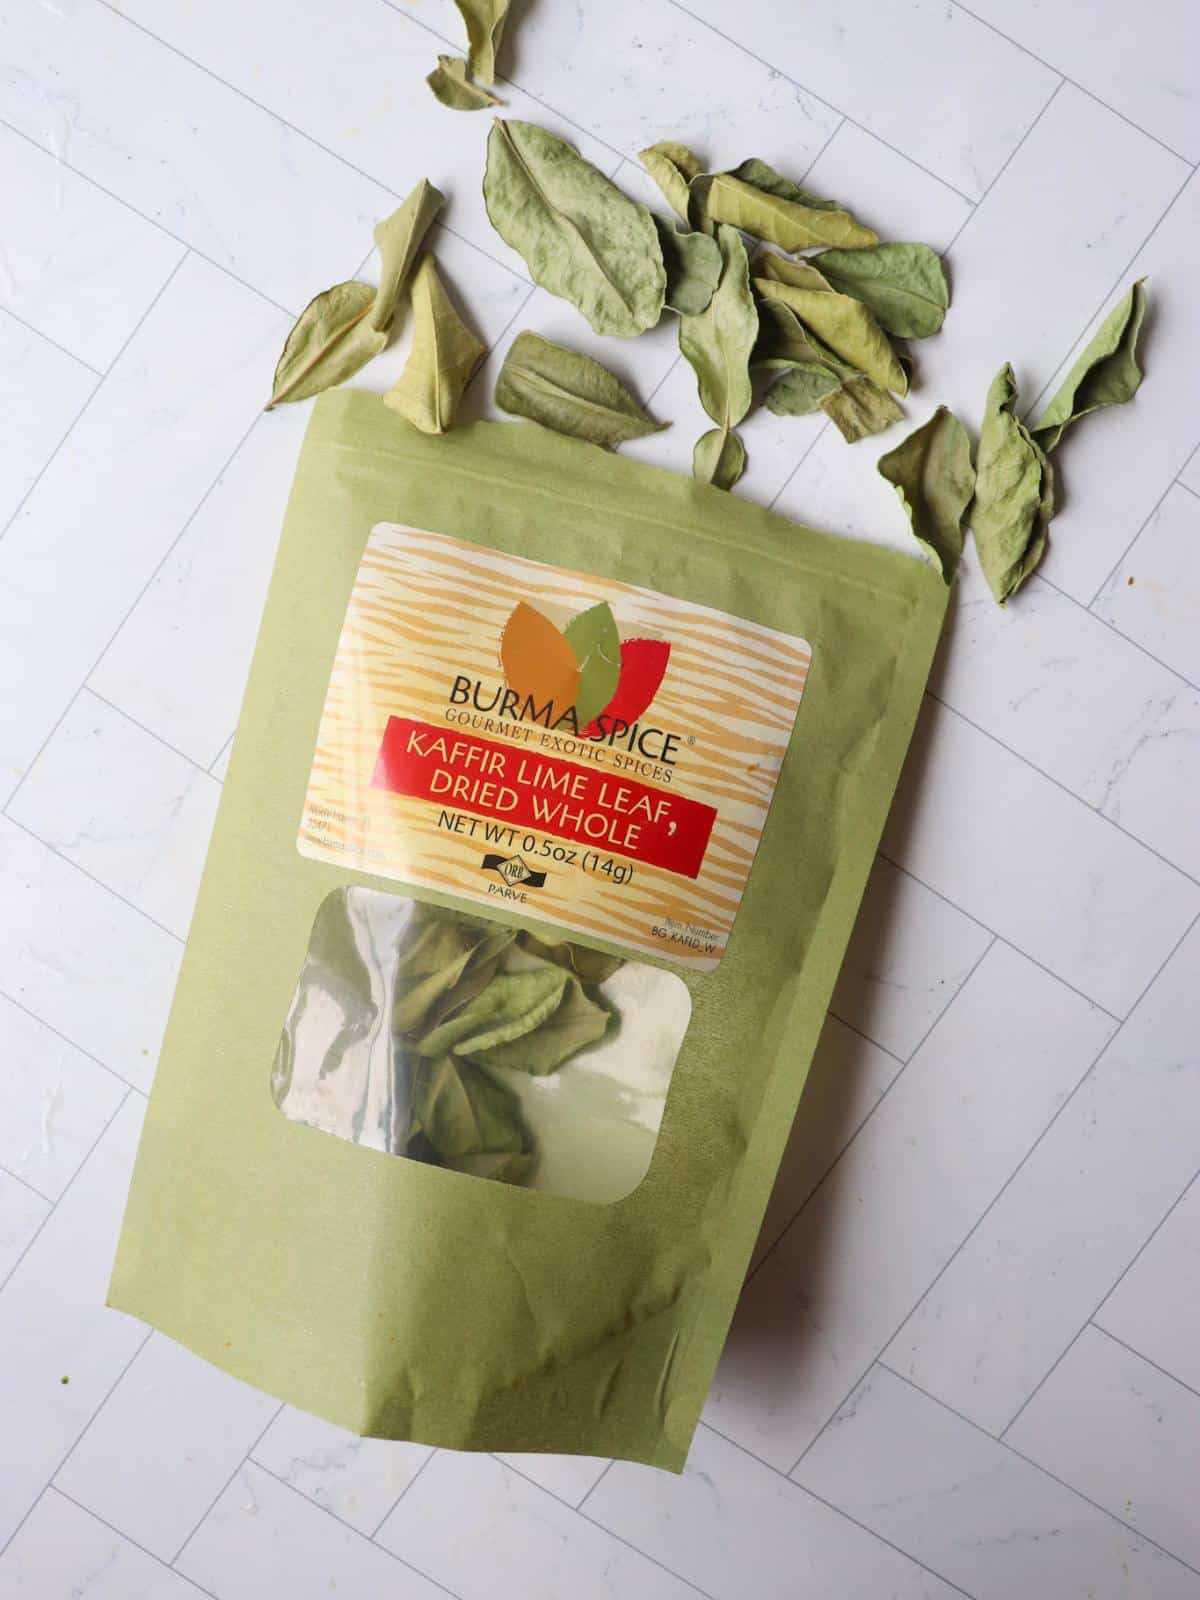 Kaffir lime leaves in a green bag on a kitchen counter.